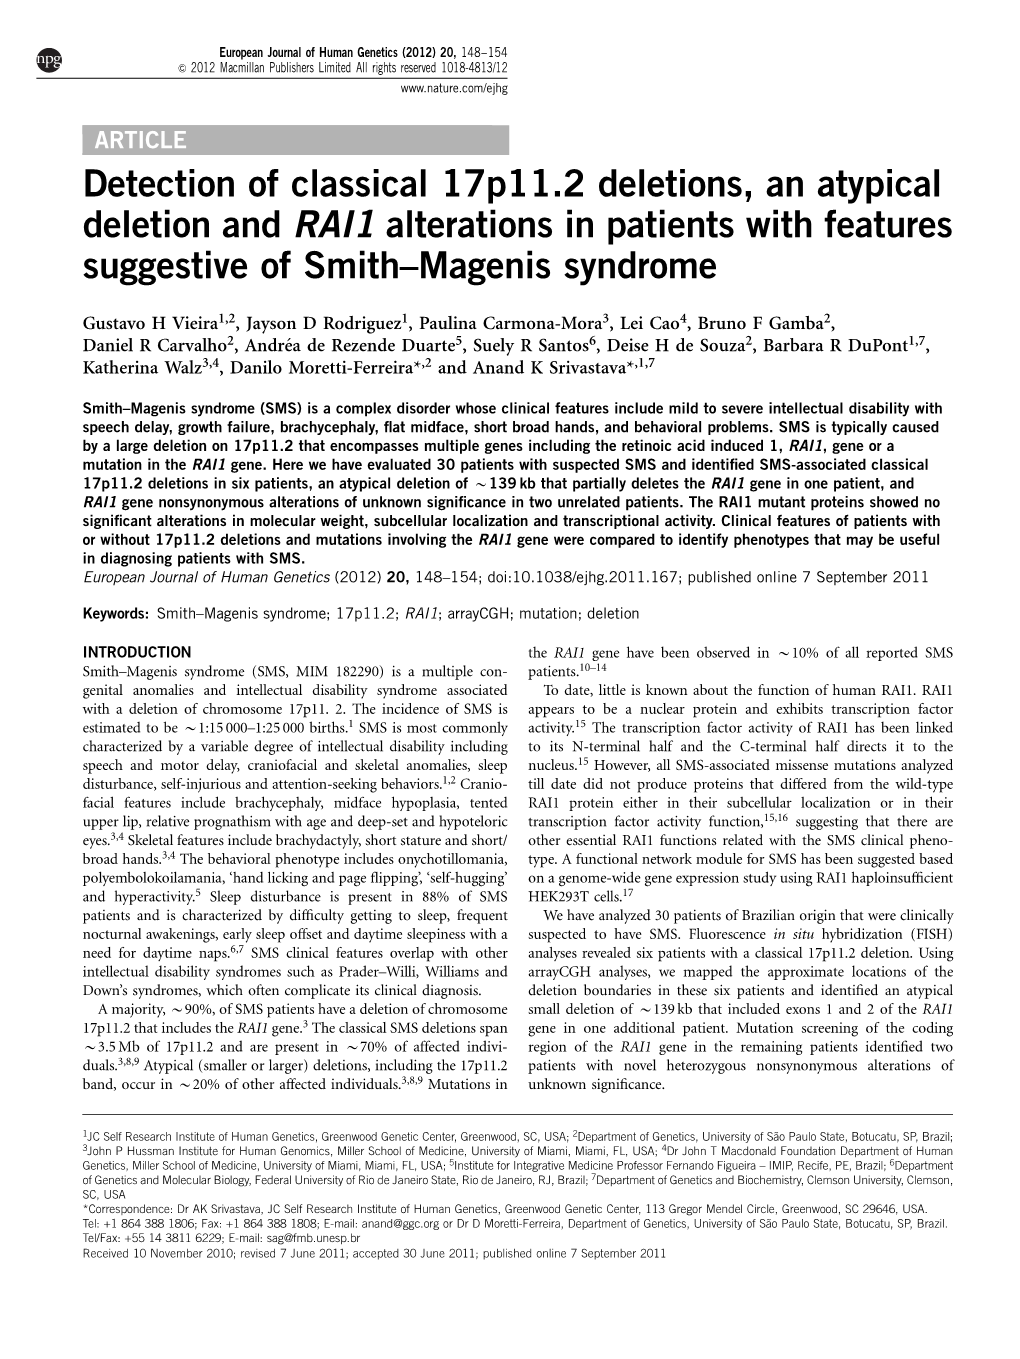 Detection of Classical 17P11.2 Deletions, an Atypical Deletion and RAI1 Alterations in Patients with Features Suggestive of Smith–Magenis Syndrome